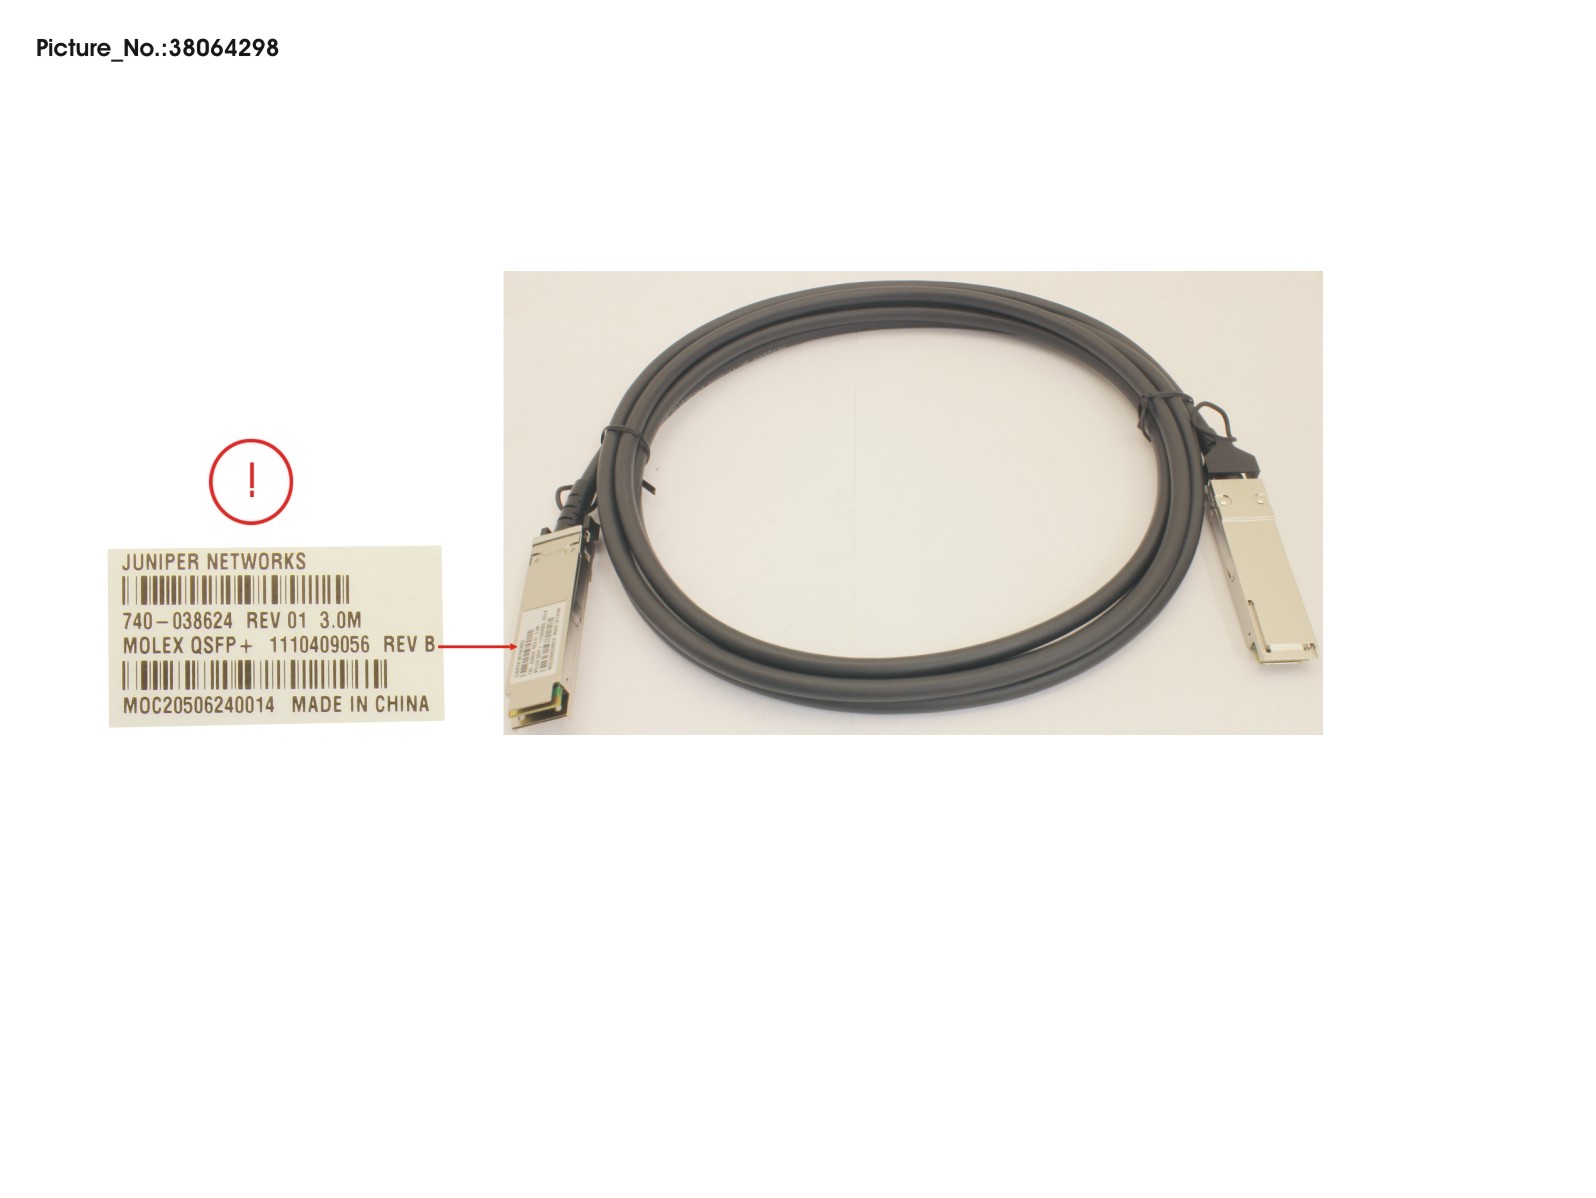 40G QSFP+ DIRECT ATTACHED CABLE 3M